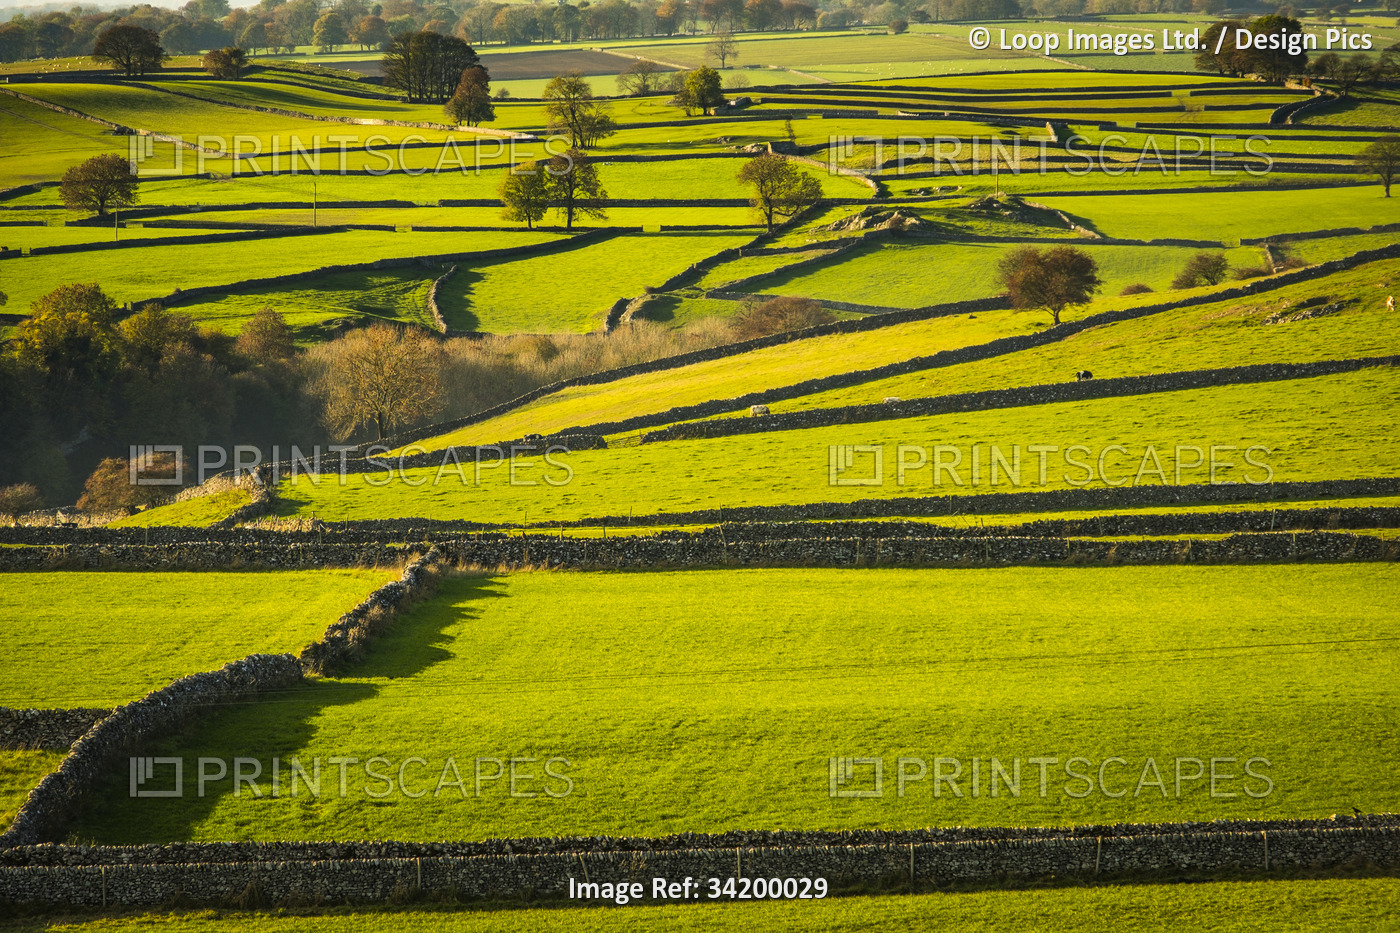 Small fields separated by dry stone walls are a feature of the landscape in the ...